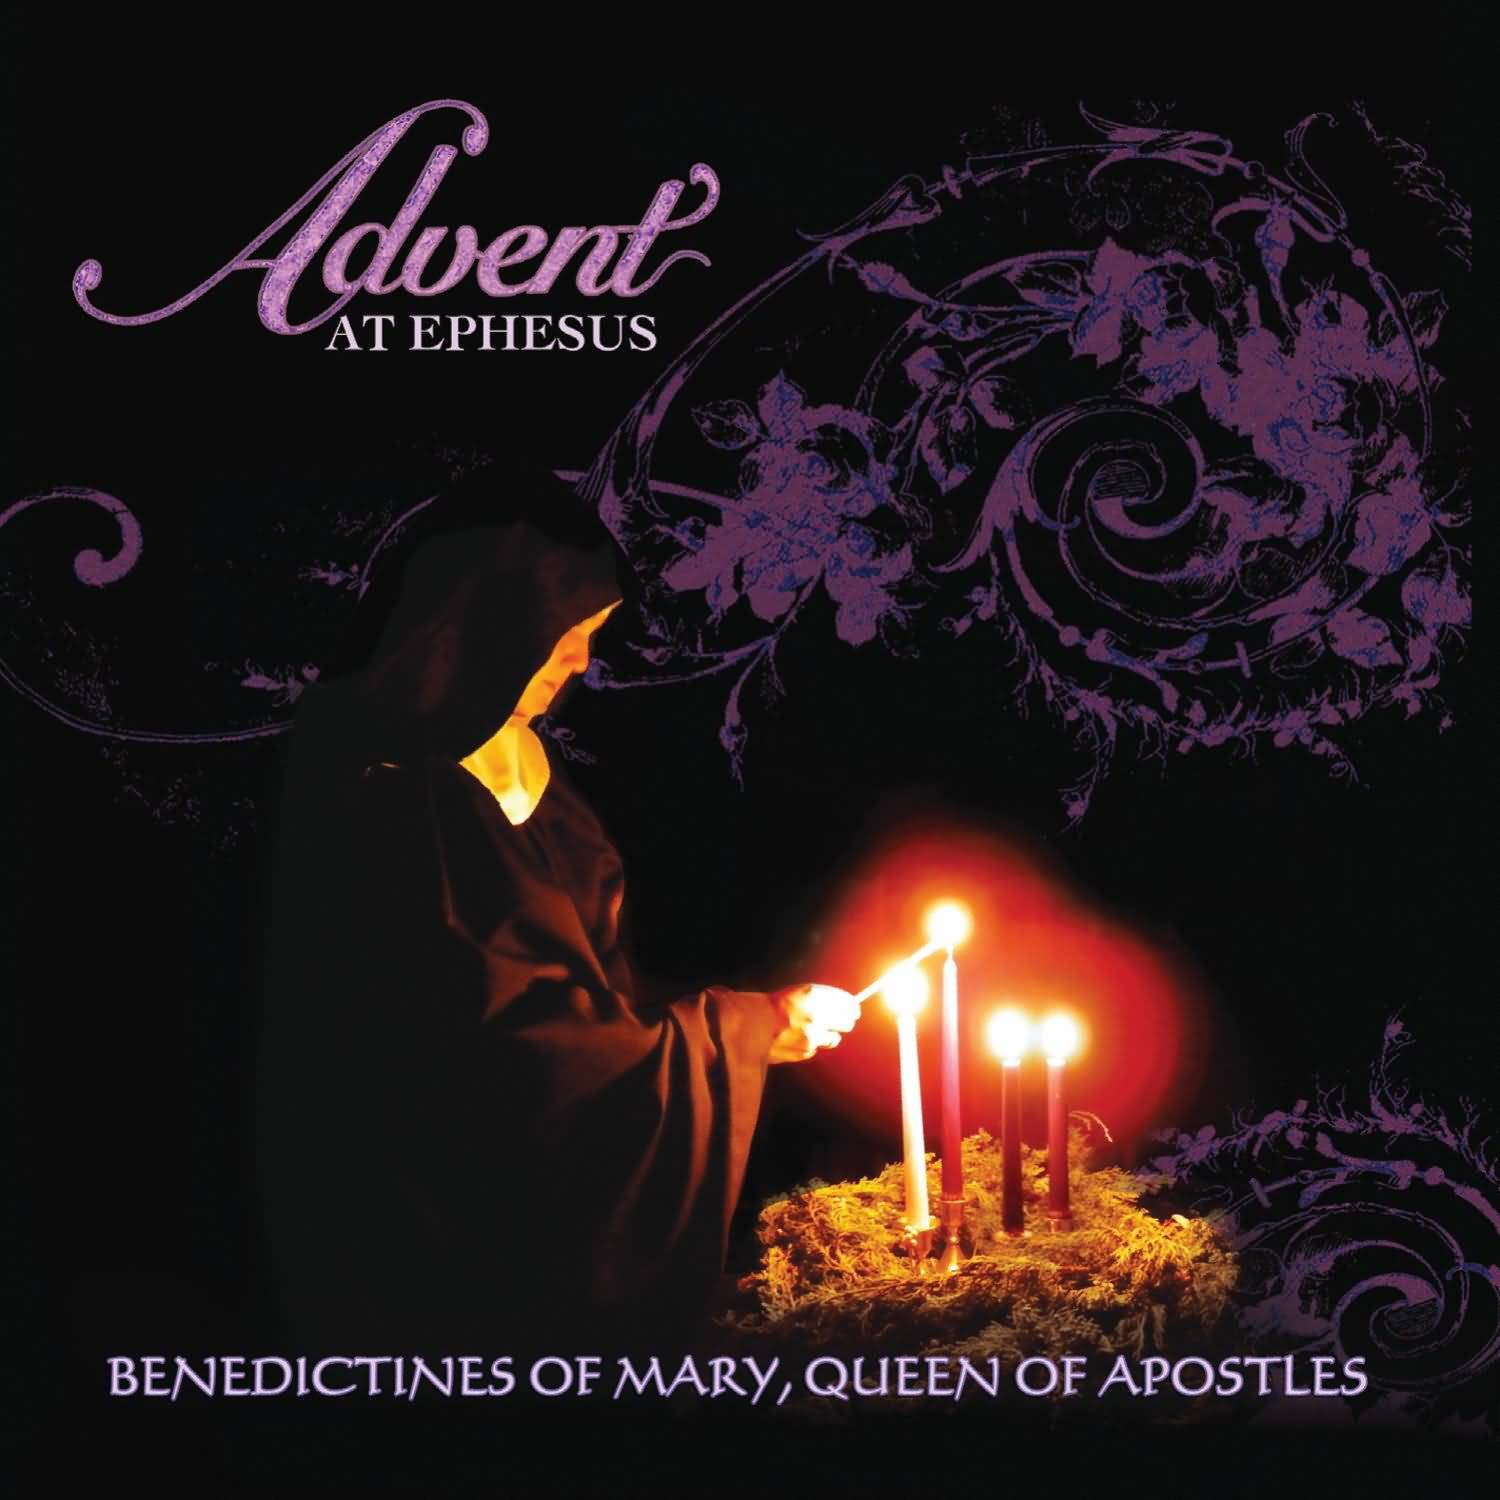 Advent At Ephesus Benedictions Of Mary, Queen Of Apostles